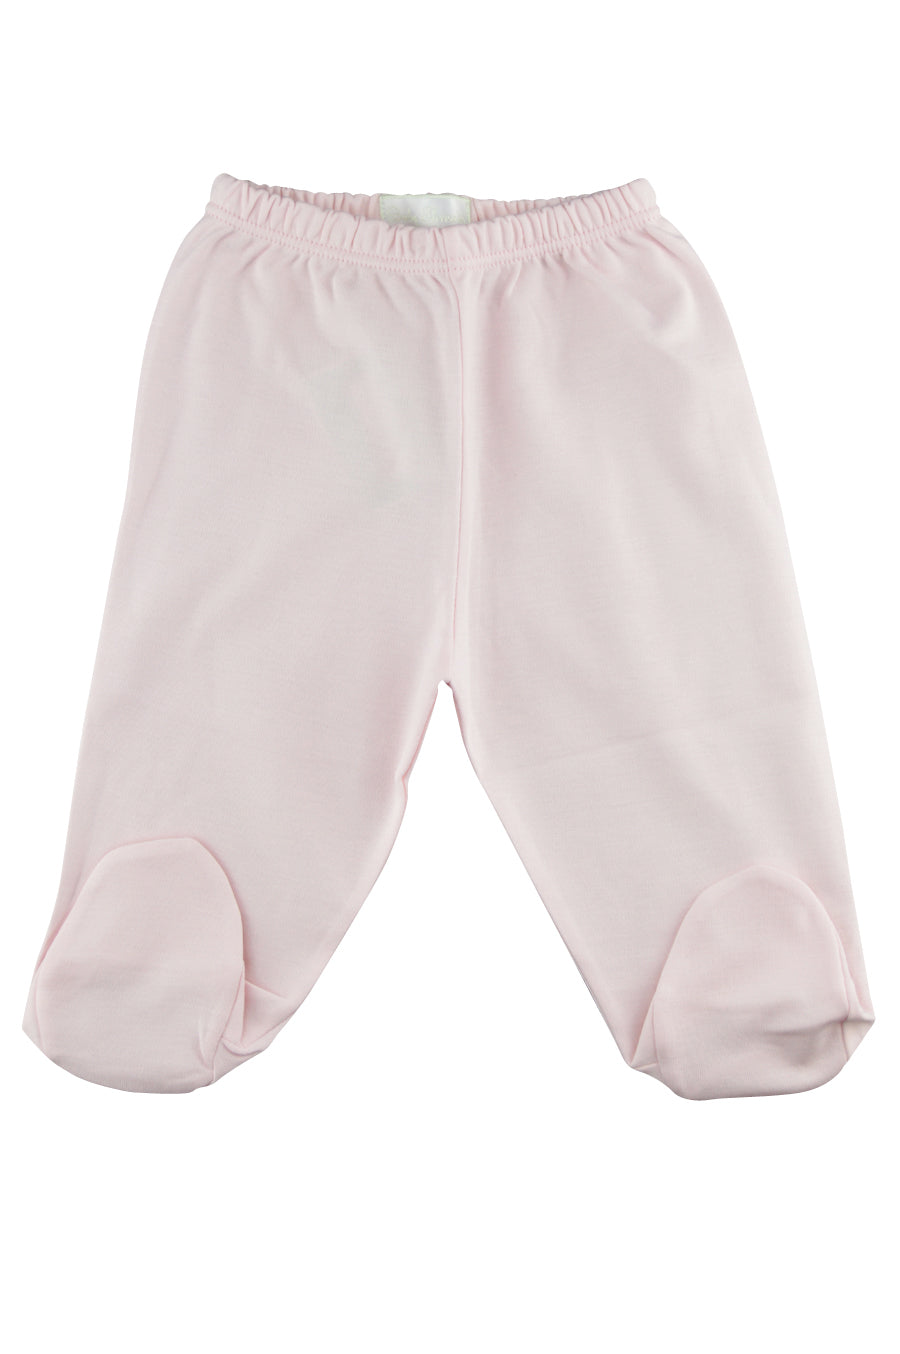 Baby Girl's Pink Footies Pants - Little Threads Inc. Children's Clothing